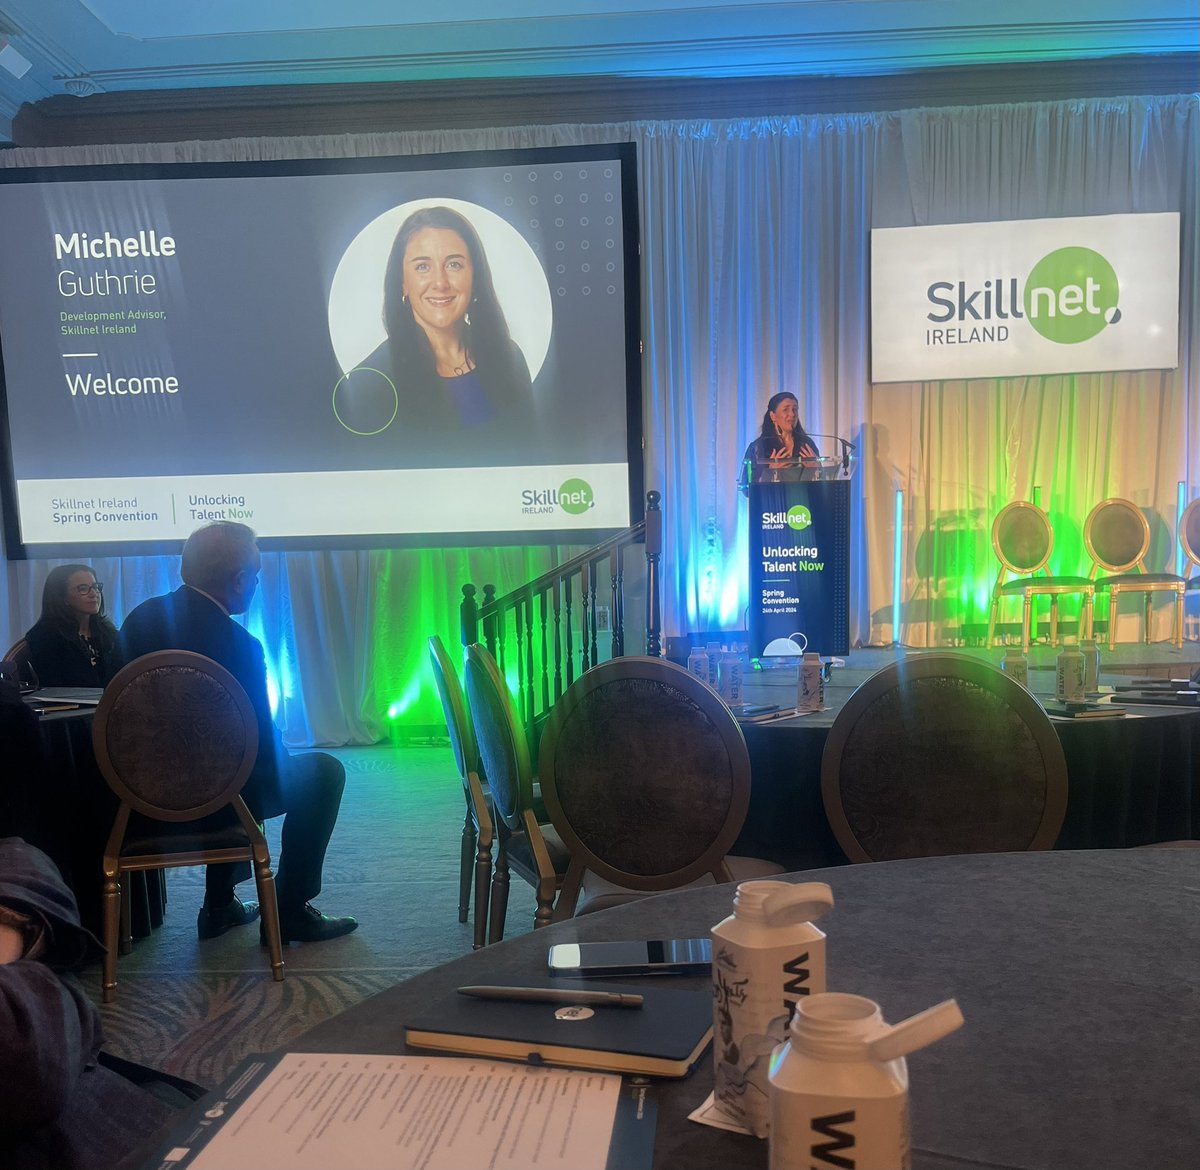 The @DigitalSkillnet team are delighted to be attending @SkillnetIreland’s Spring Convention today, with Michelle Guthrie giving a warm welcome to the audience as we shine a light on life-long learning, recent innovations and supporting Ireland’s competitiveness .…